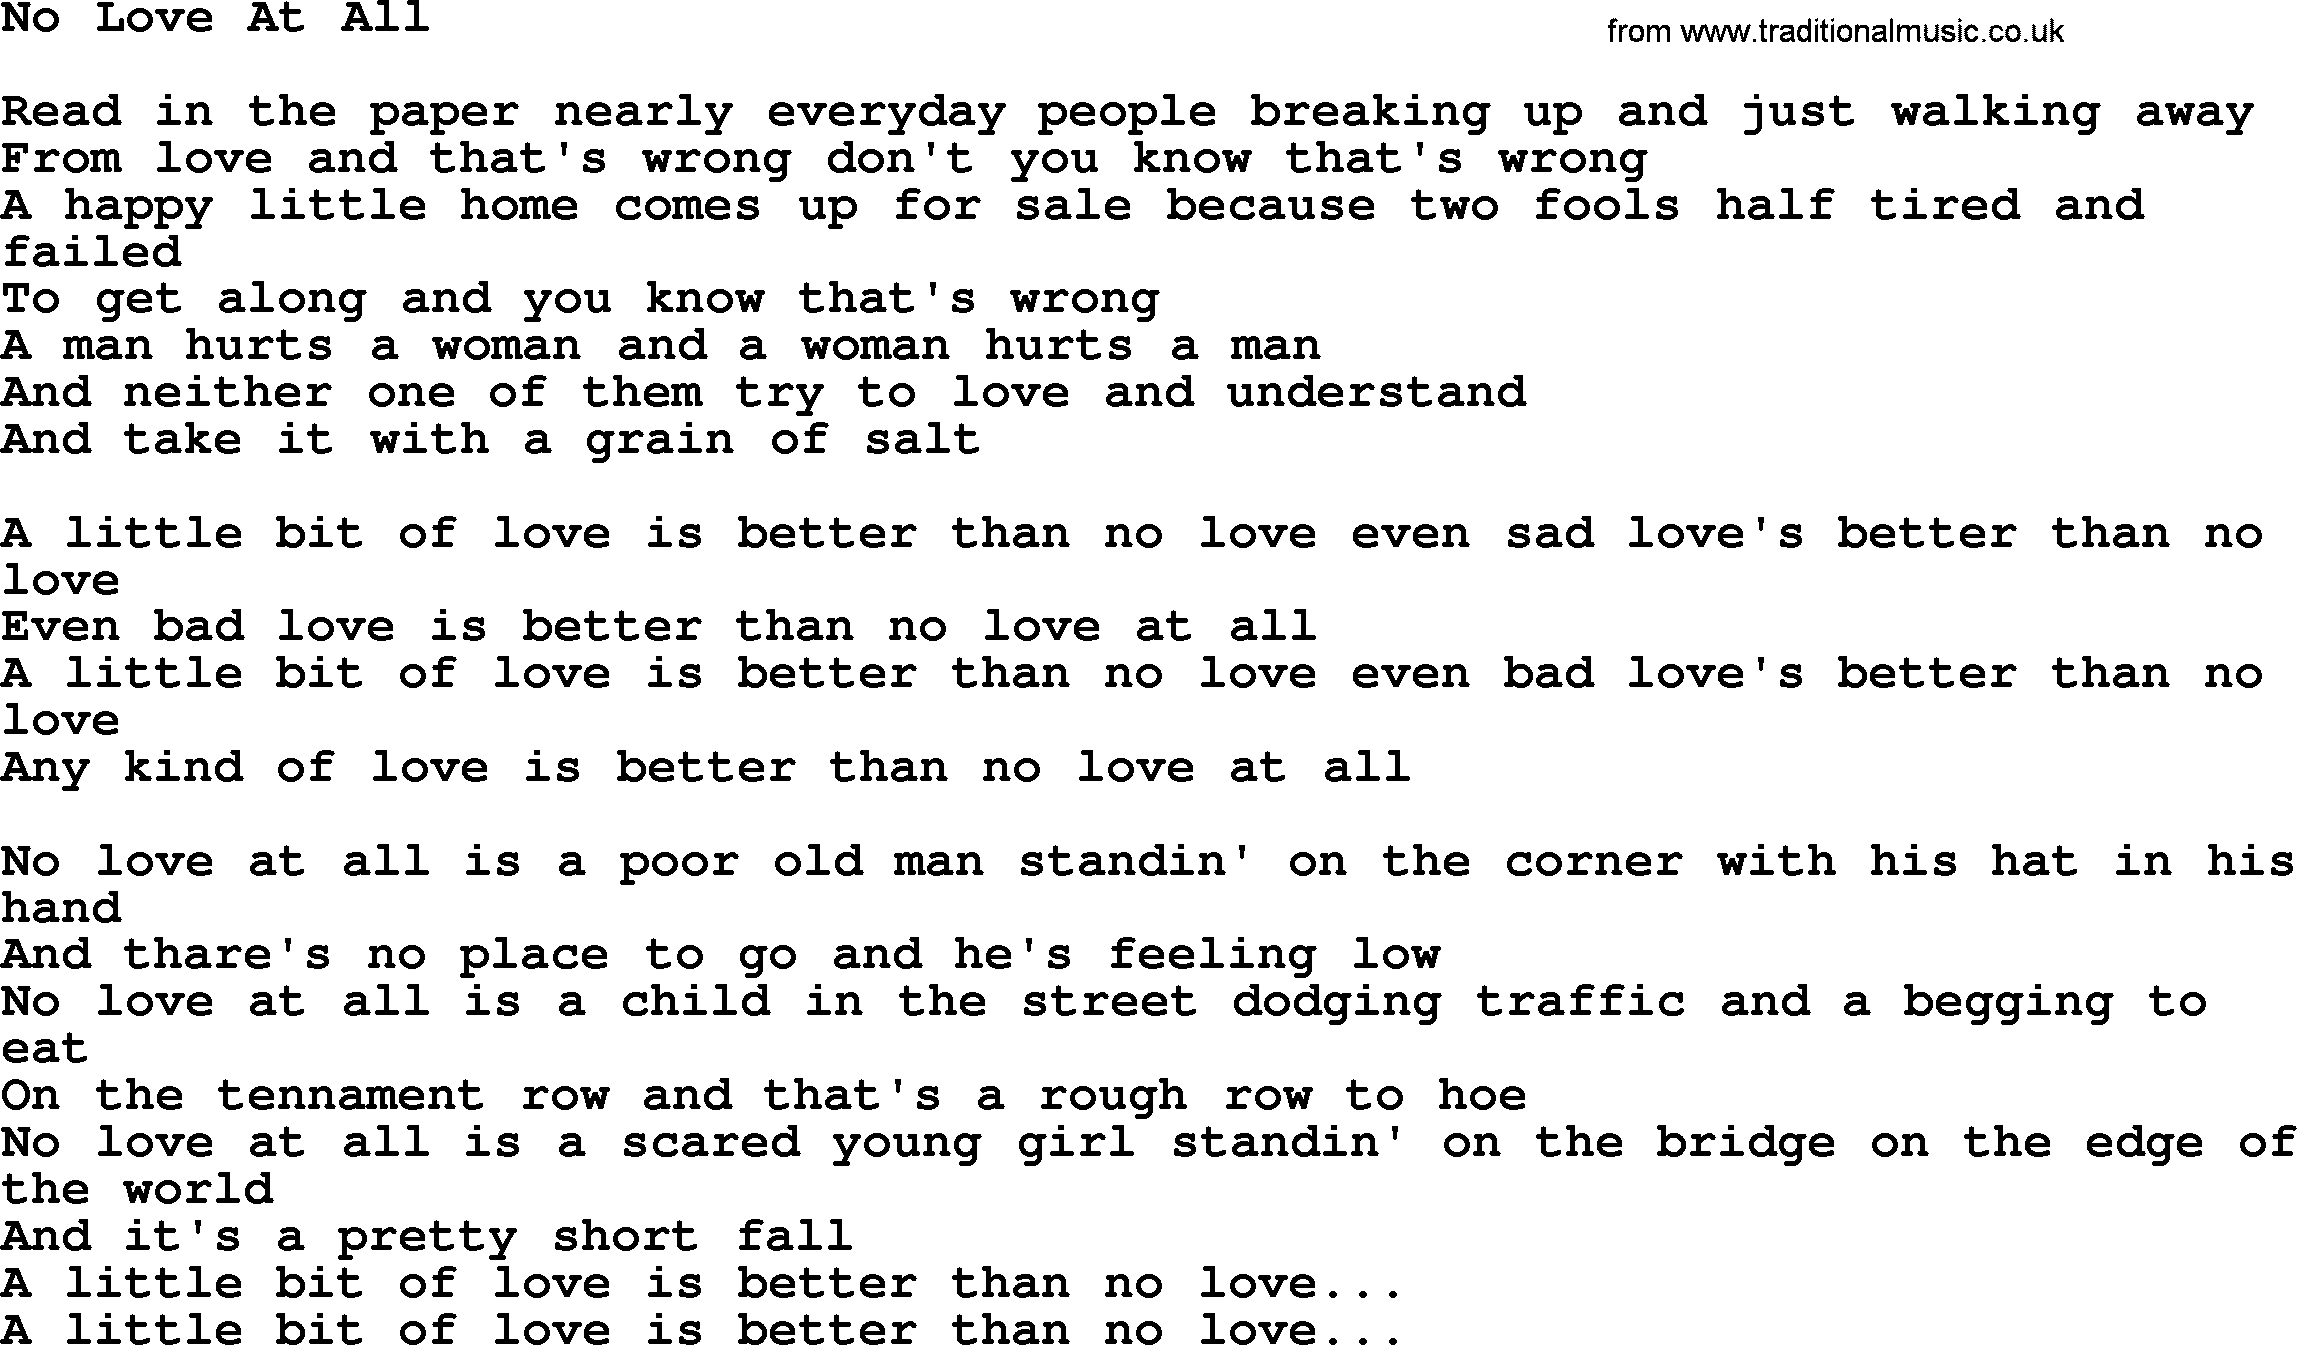 Willie Nelson song: No Love At All lyrics